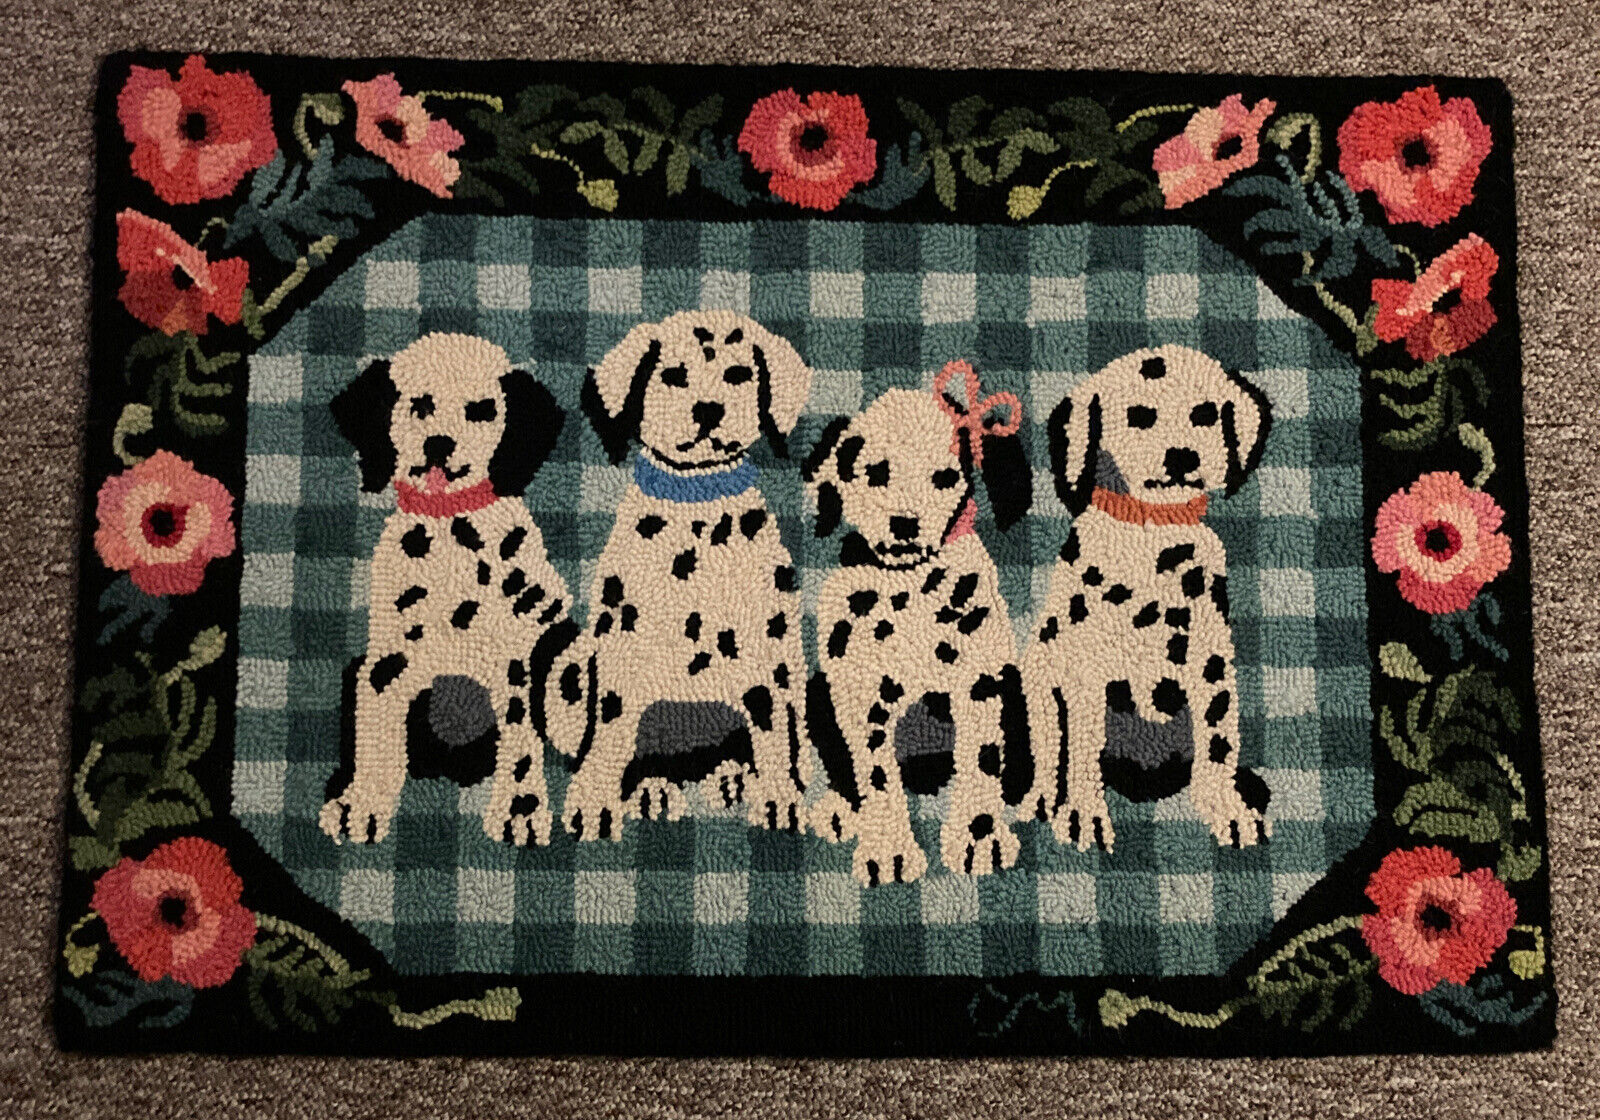 Claire Murray Hand Hooked Wool Rug “dalmatians”  26 X 38 Inches.